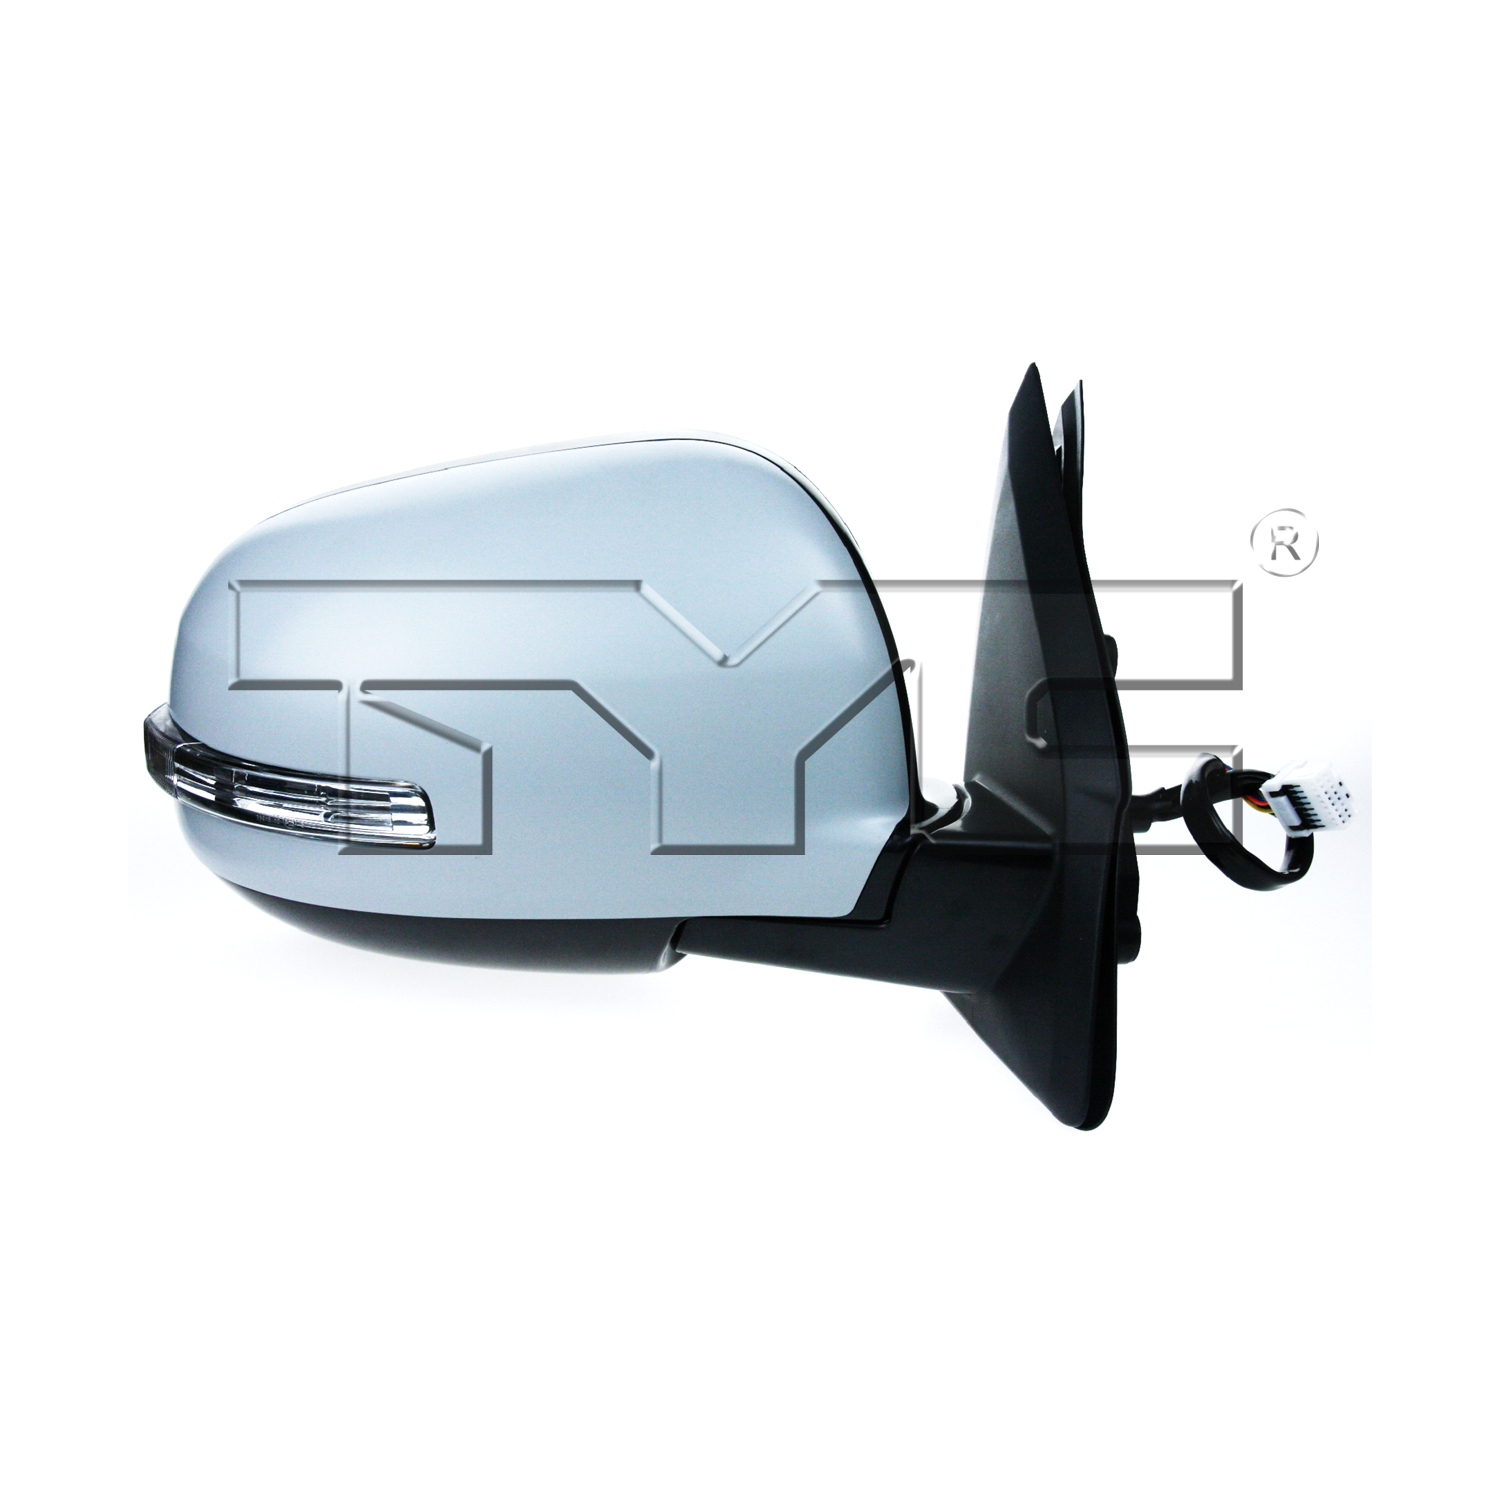 Aftermarket MIRRORS for MITSUBISHI - OUTLANDER, OUTLANDER,12-13,LT Mirror outside rear view